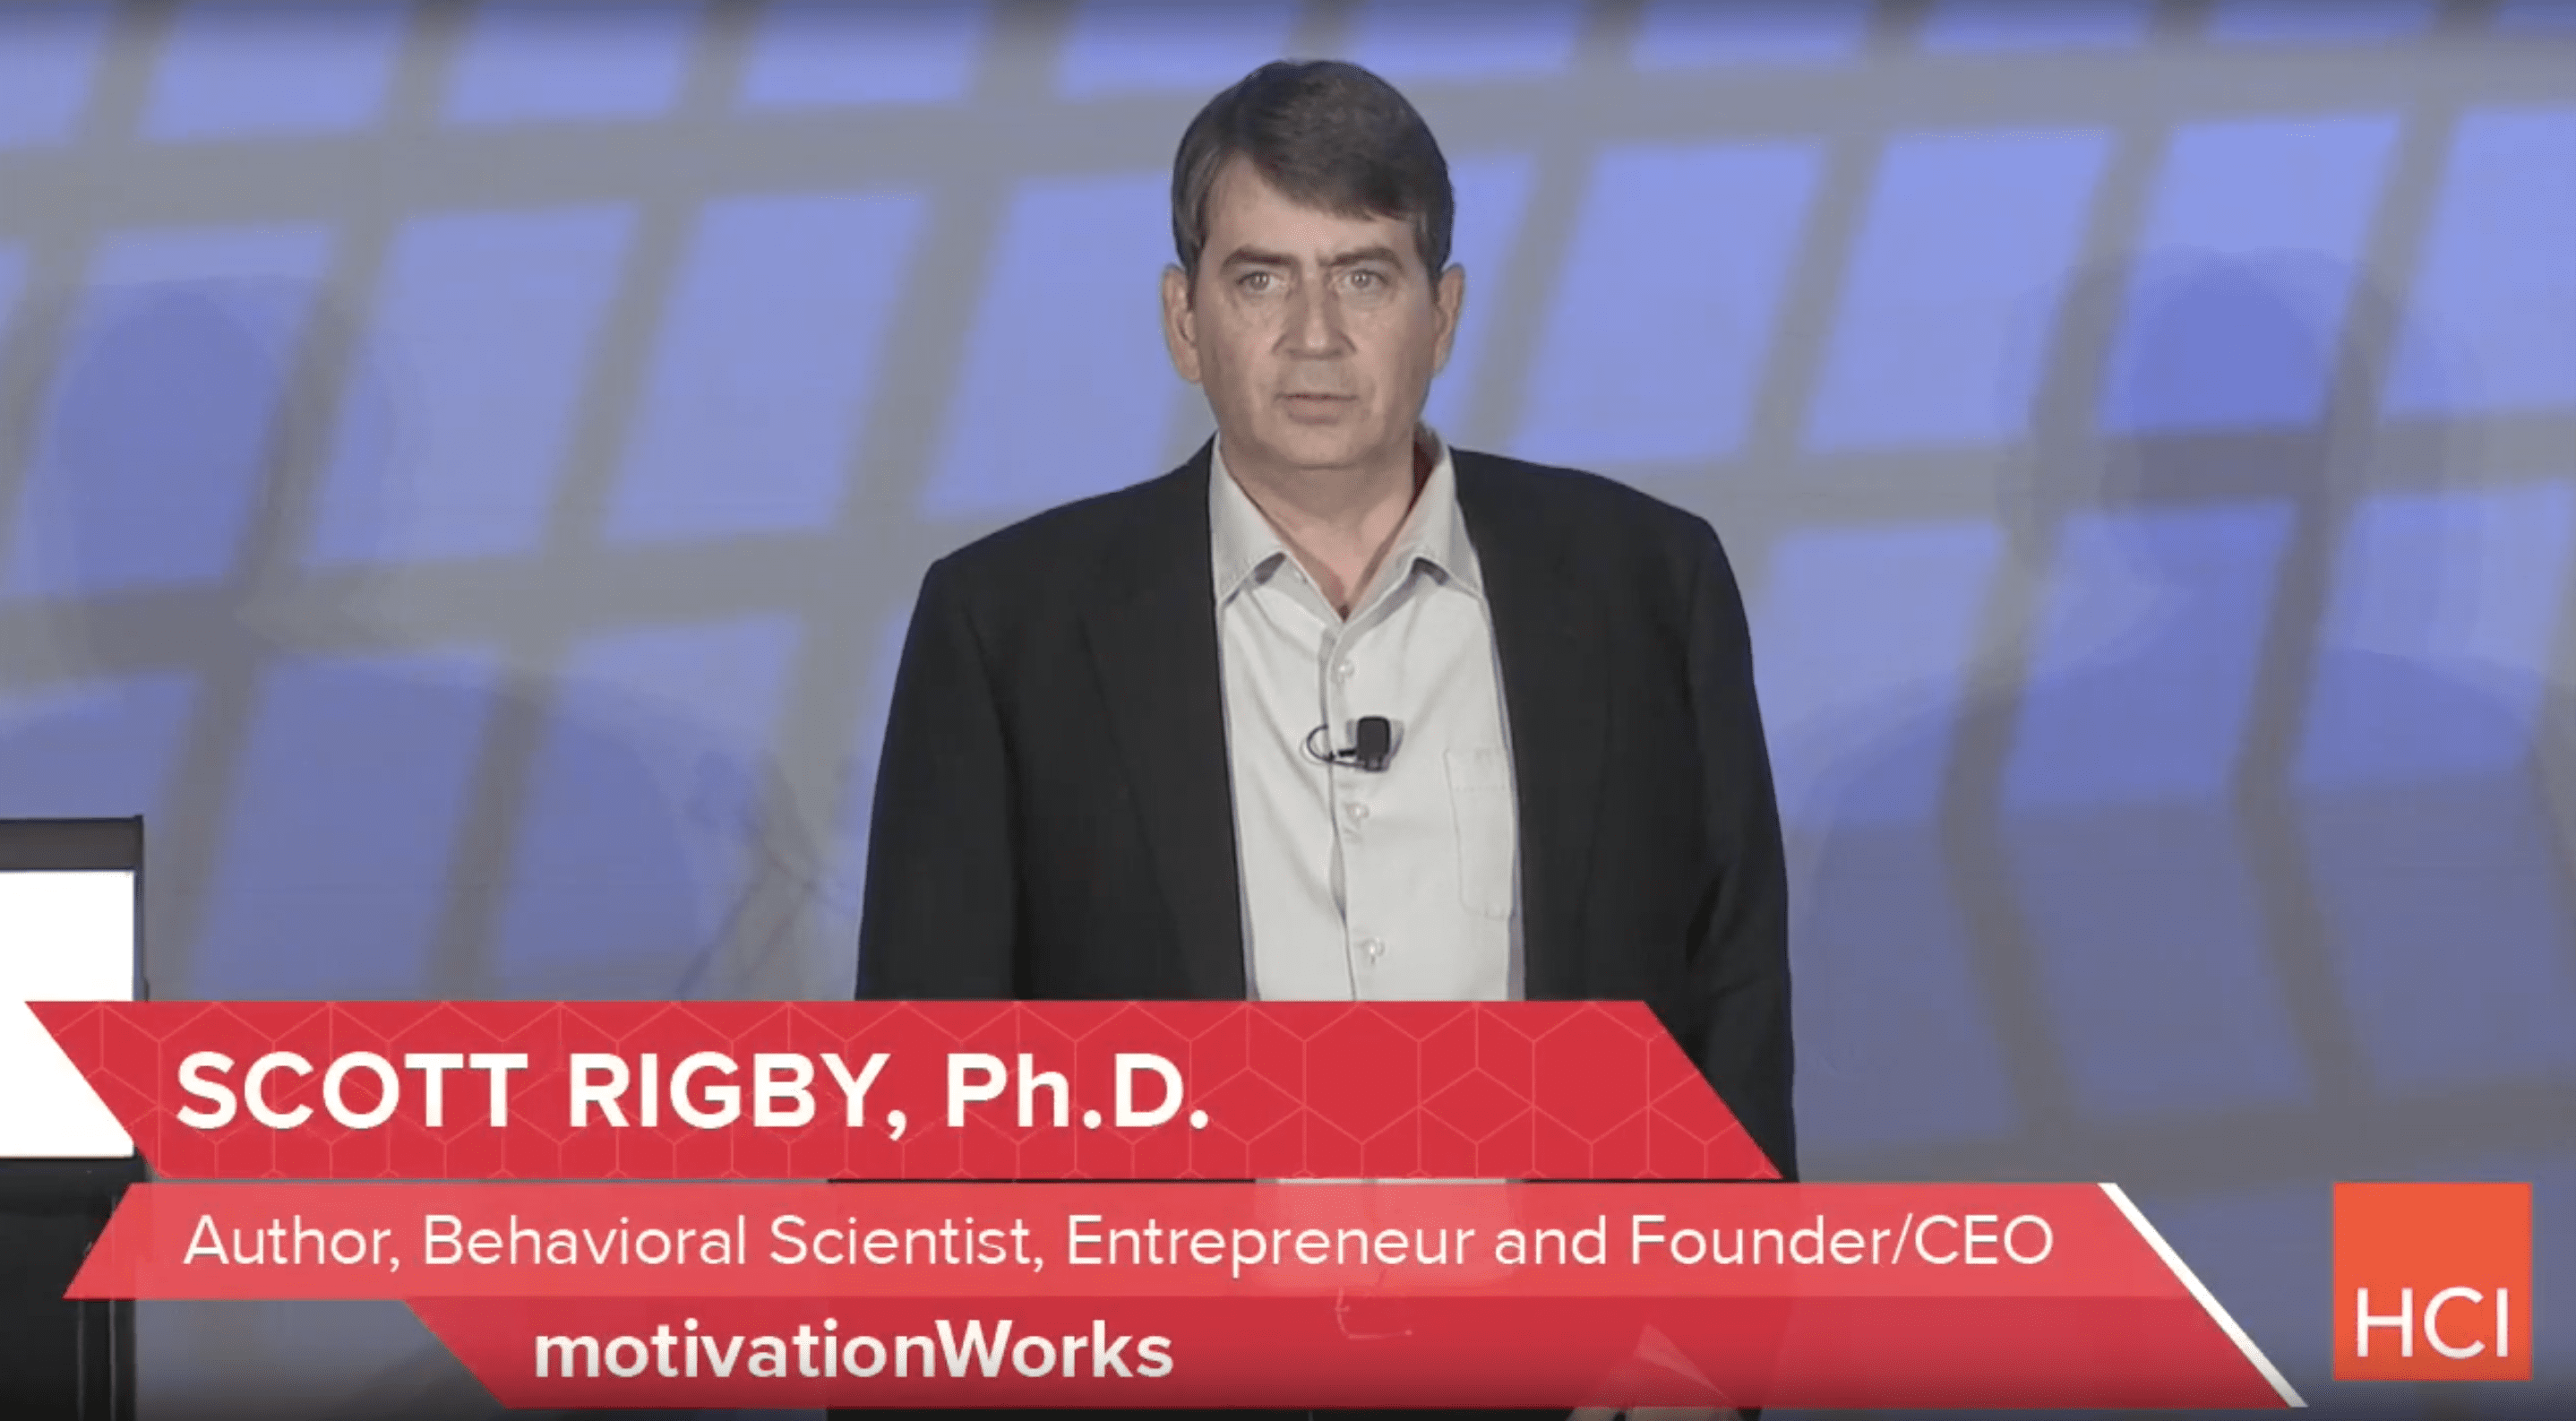 Employee Engagement Keynote by Scott Rigby at HCI 2018